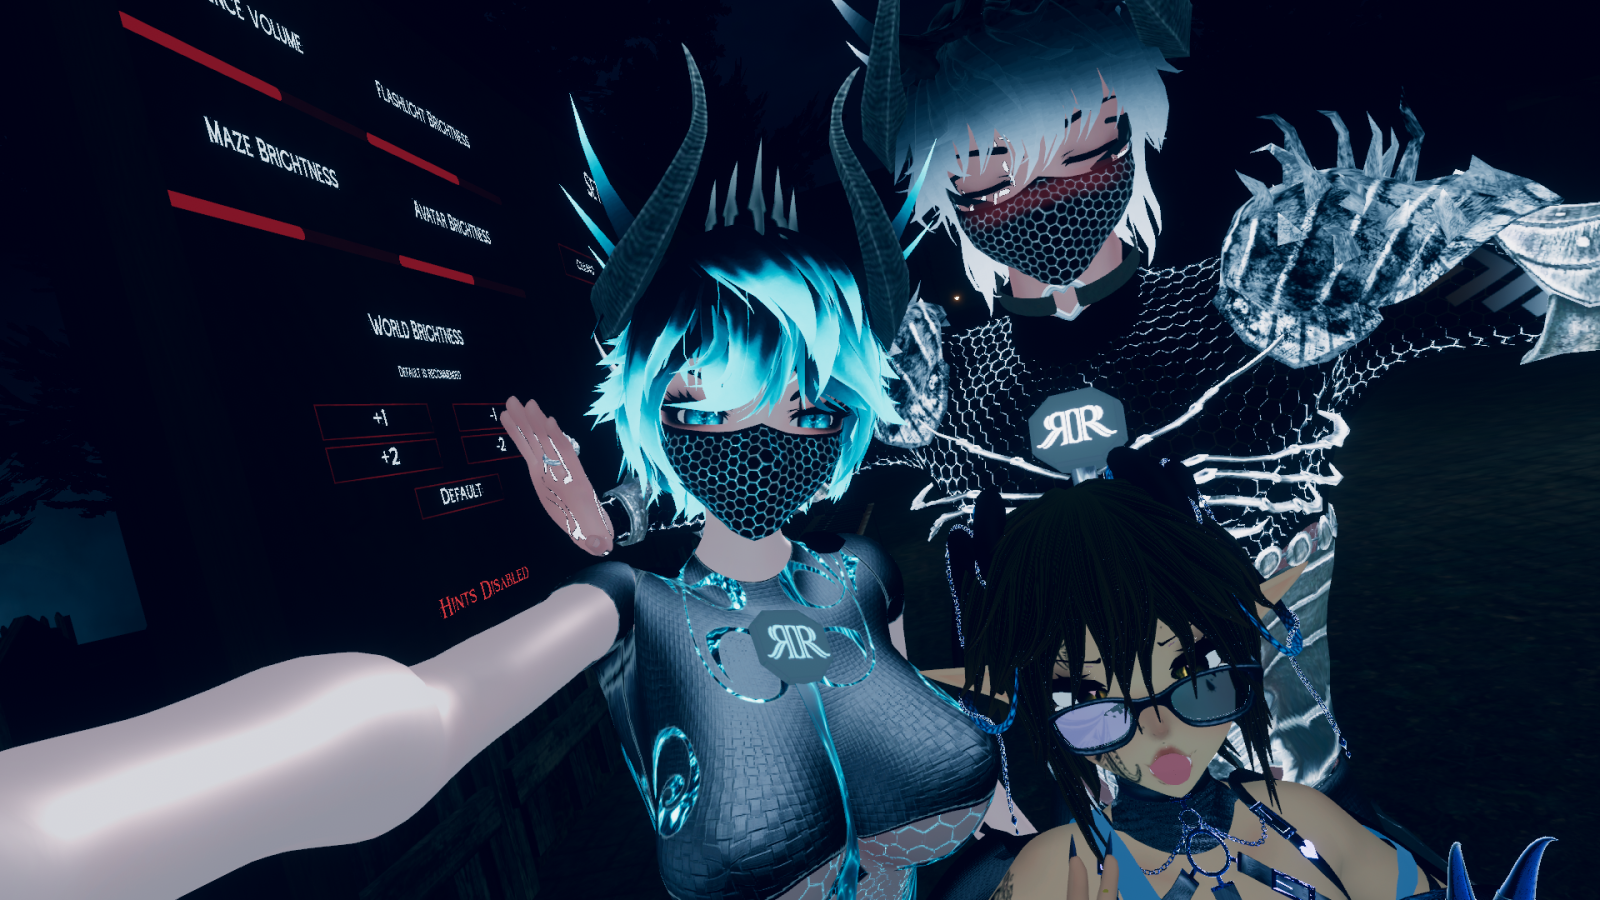 VRChat_1920x1080_2021-09-12_14-35-20.114.png